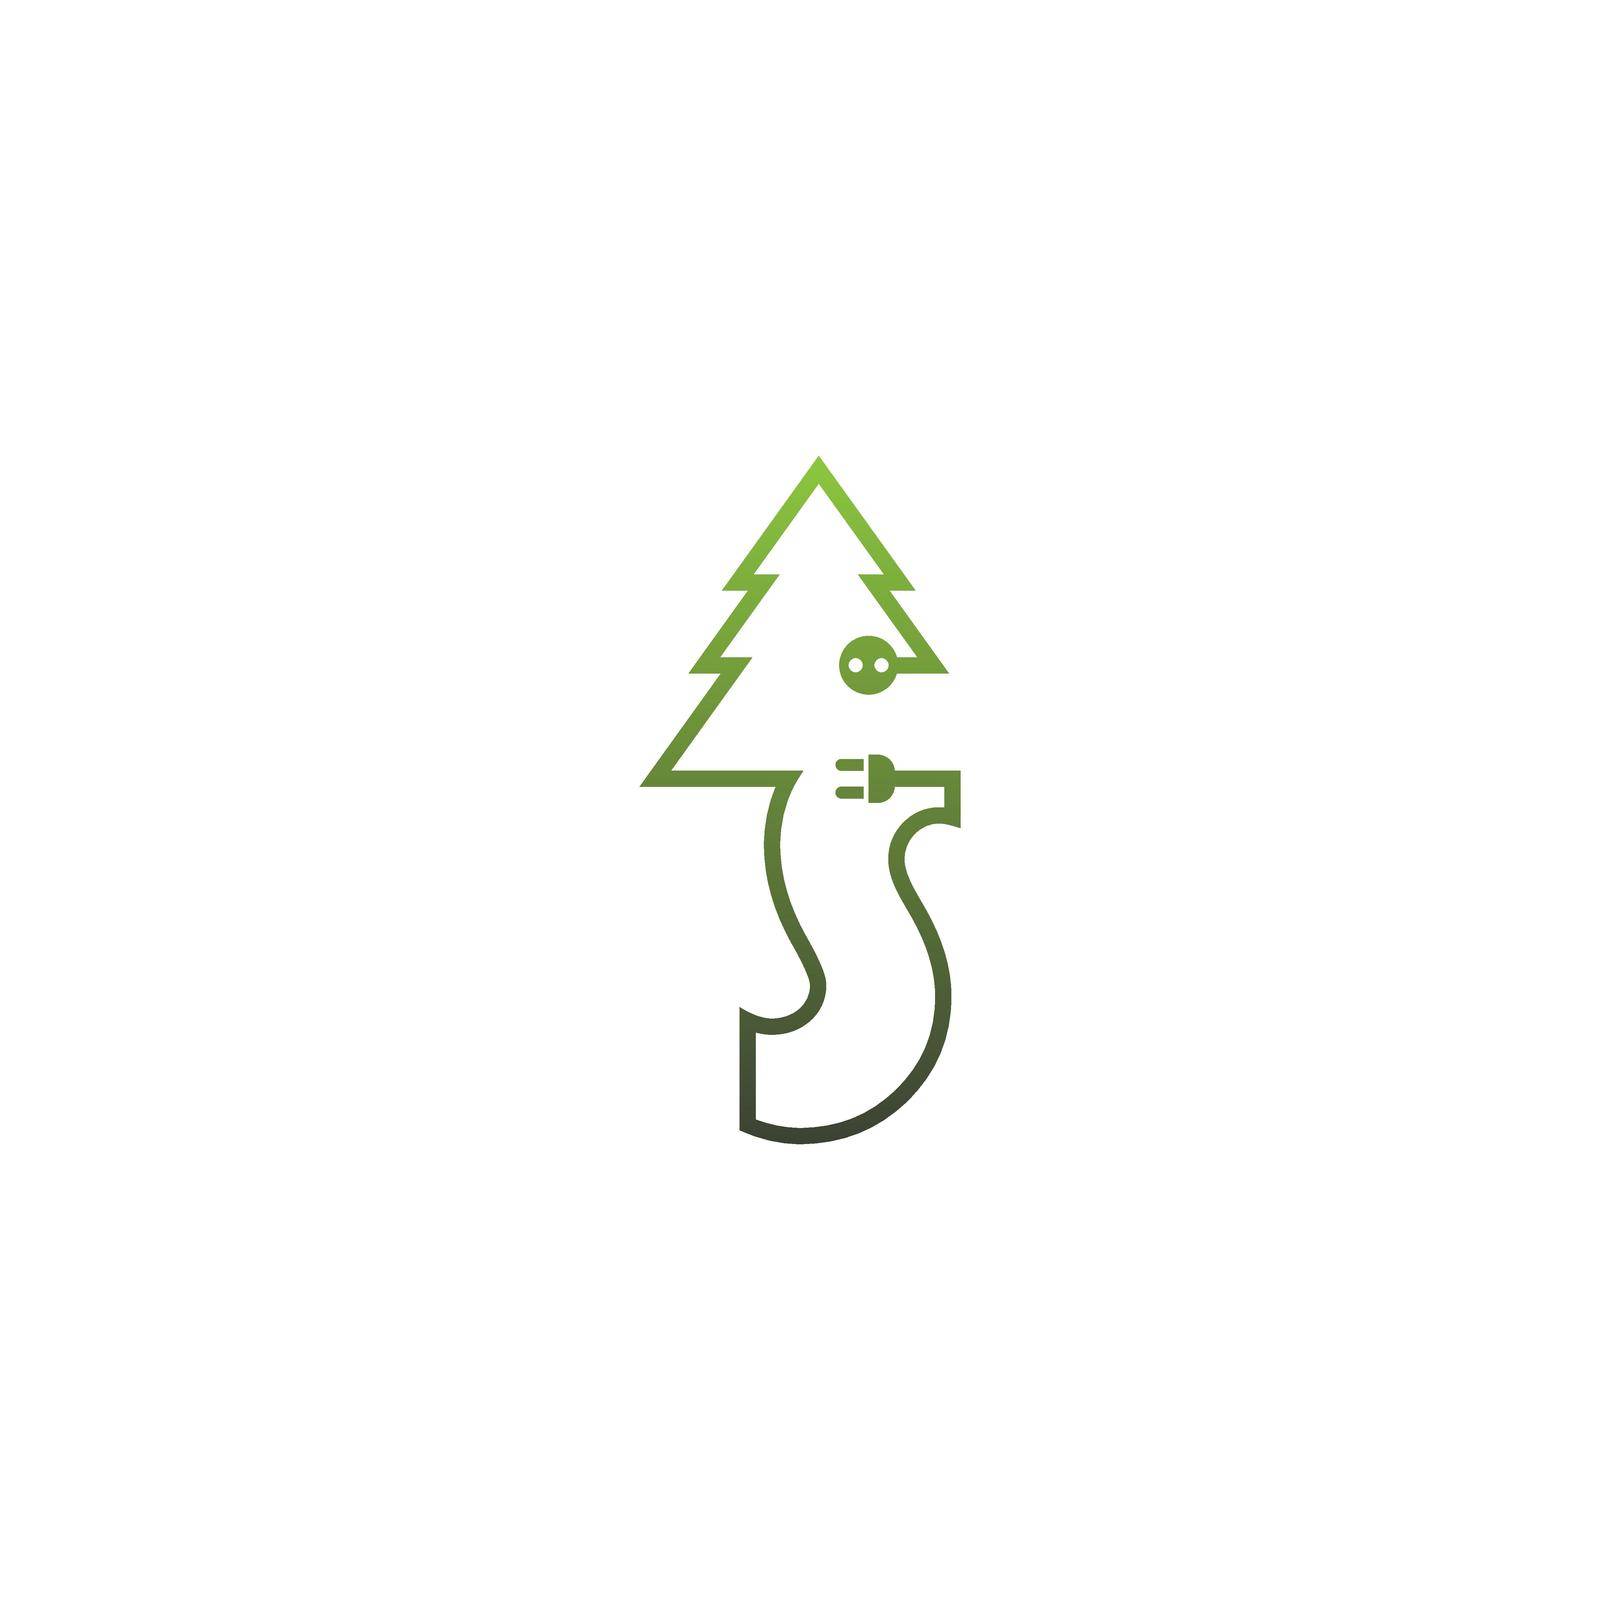 Letter tree Logo, Concept Letter + icon tree